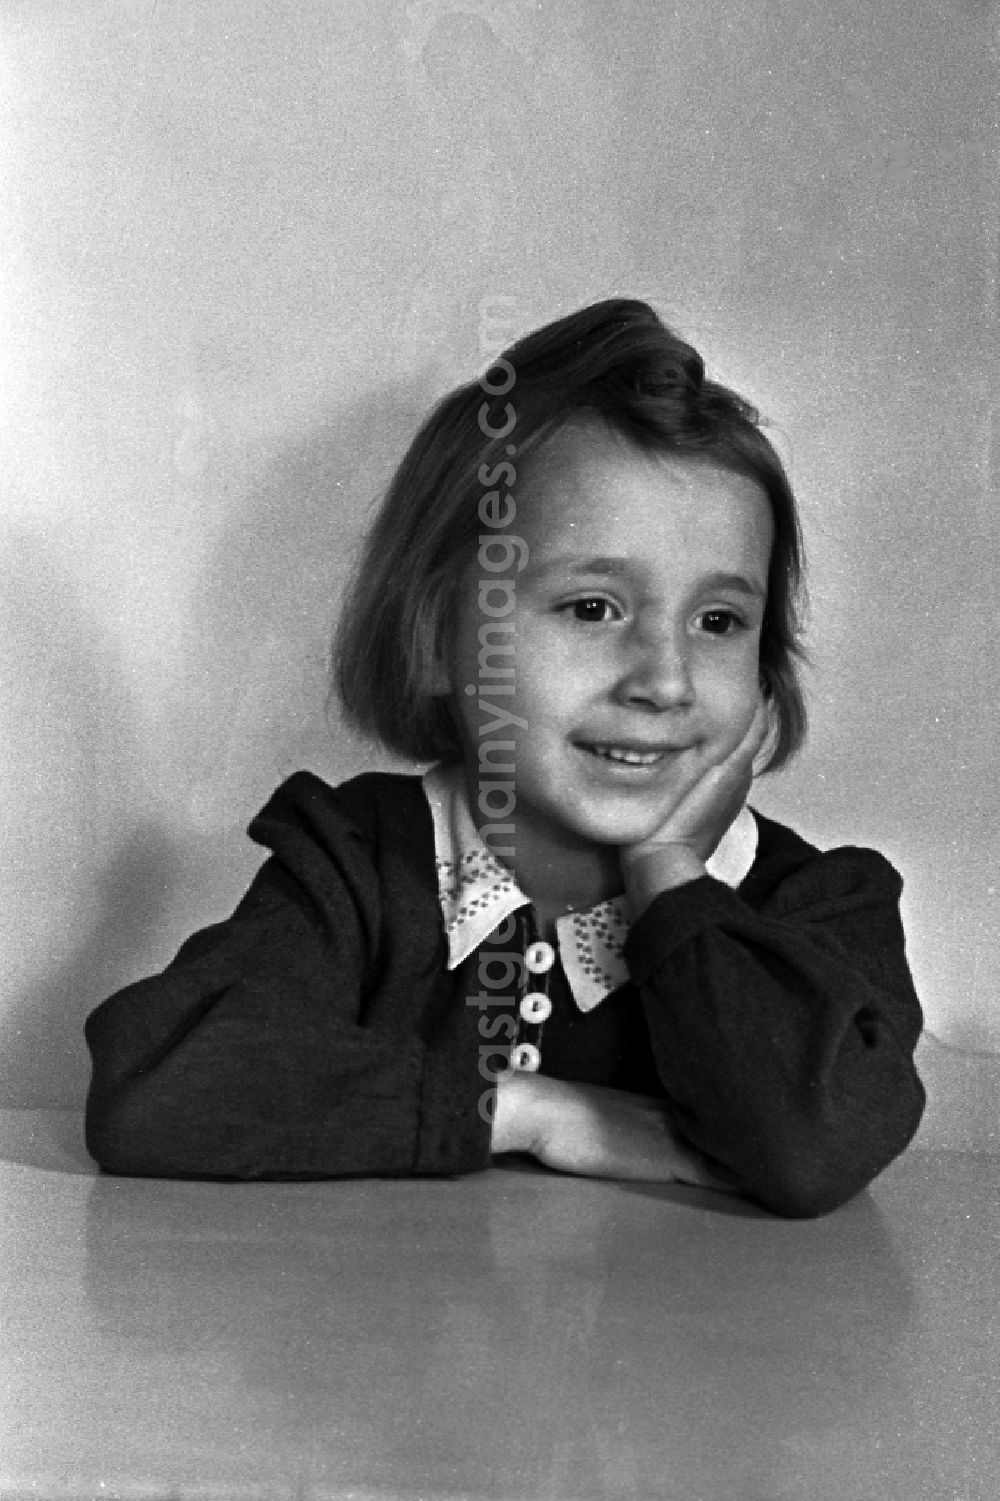 GDR photo archive: Merseburg - Little girl in the portrait in Merseburg in the federal state Saxony-Anhalt in Germany